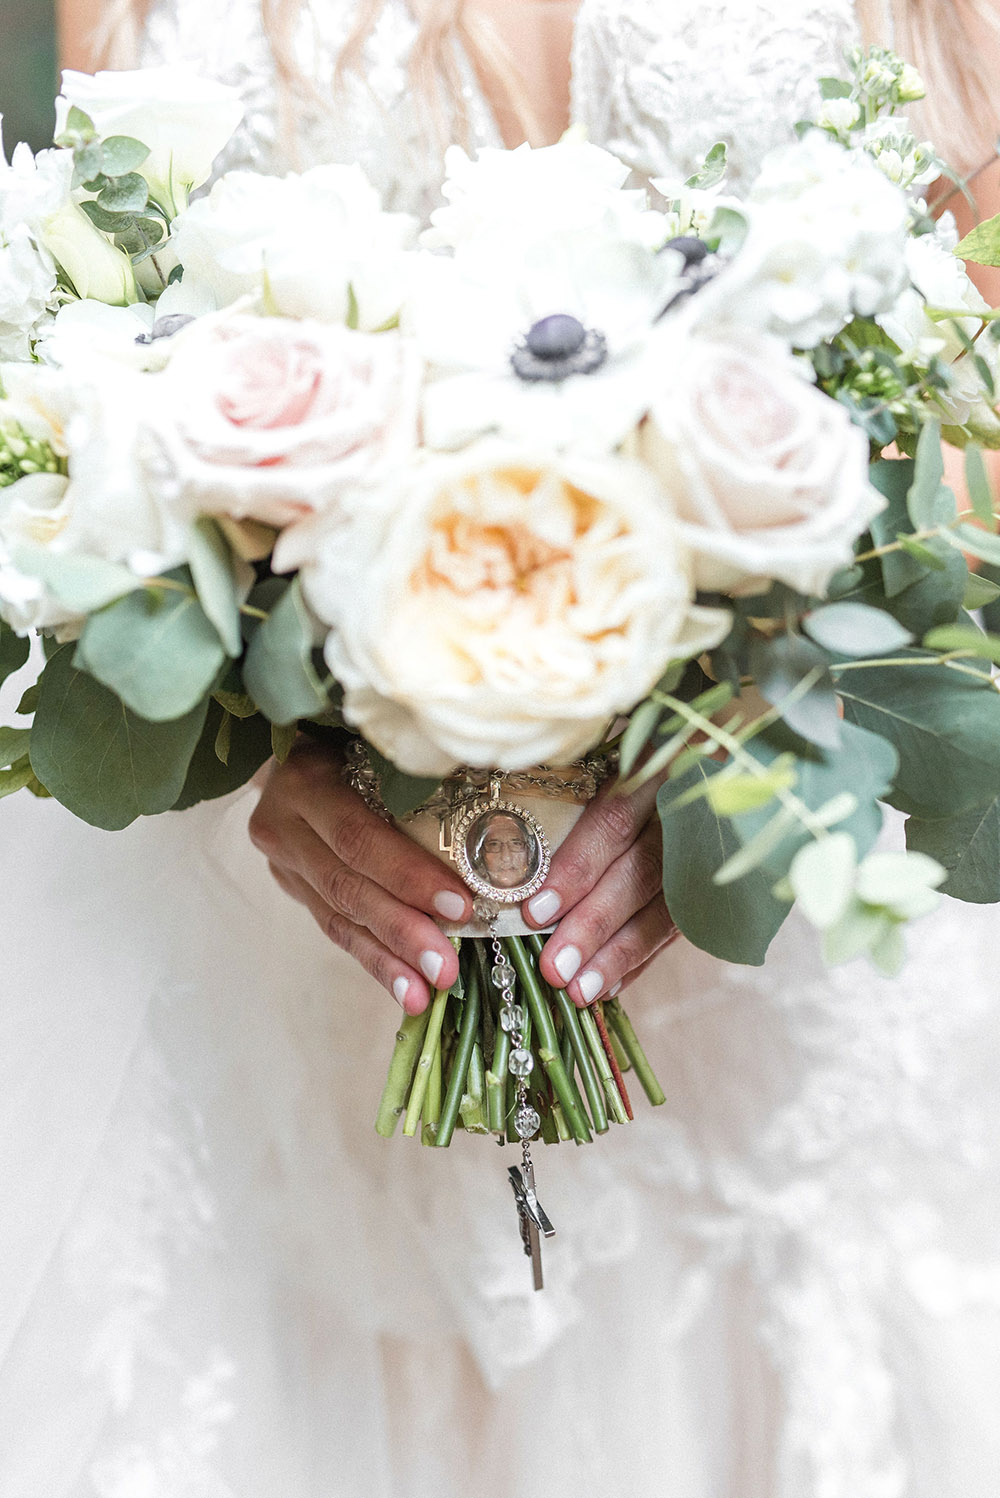 On the wedding day, Kelly walked down the aisle in the New Orleans Pharmacy Museum courtyard with a photograph of her father attached to her bouquet.